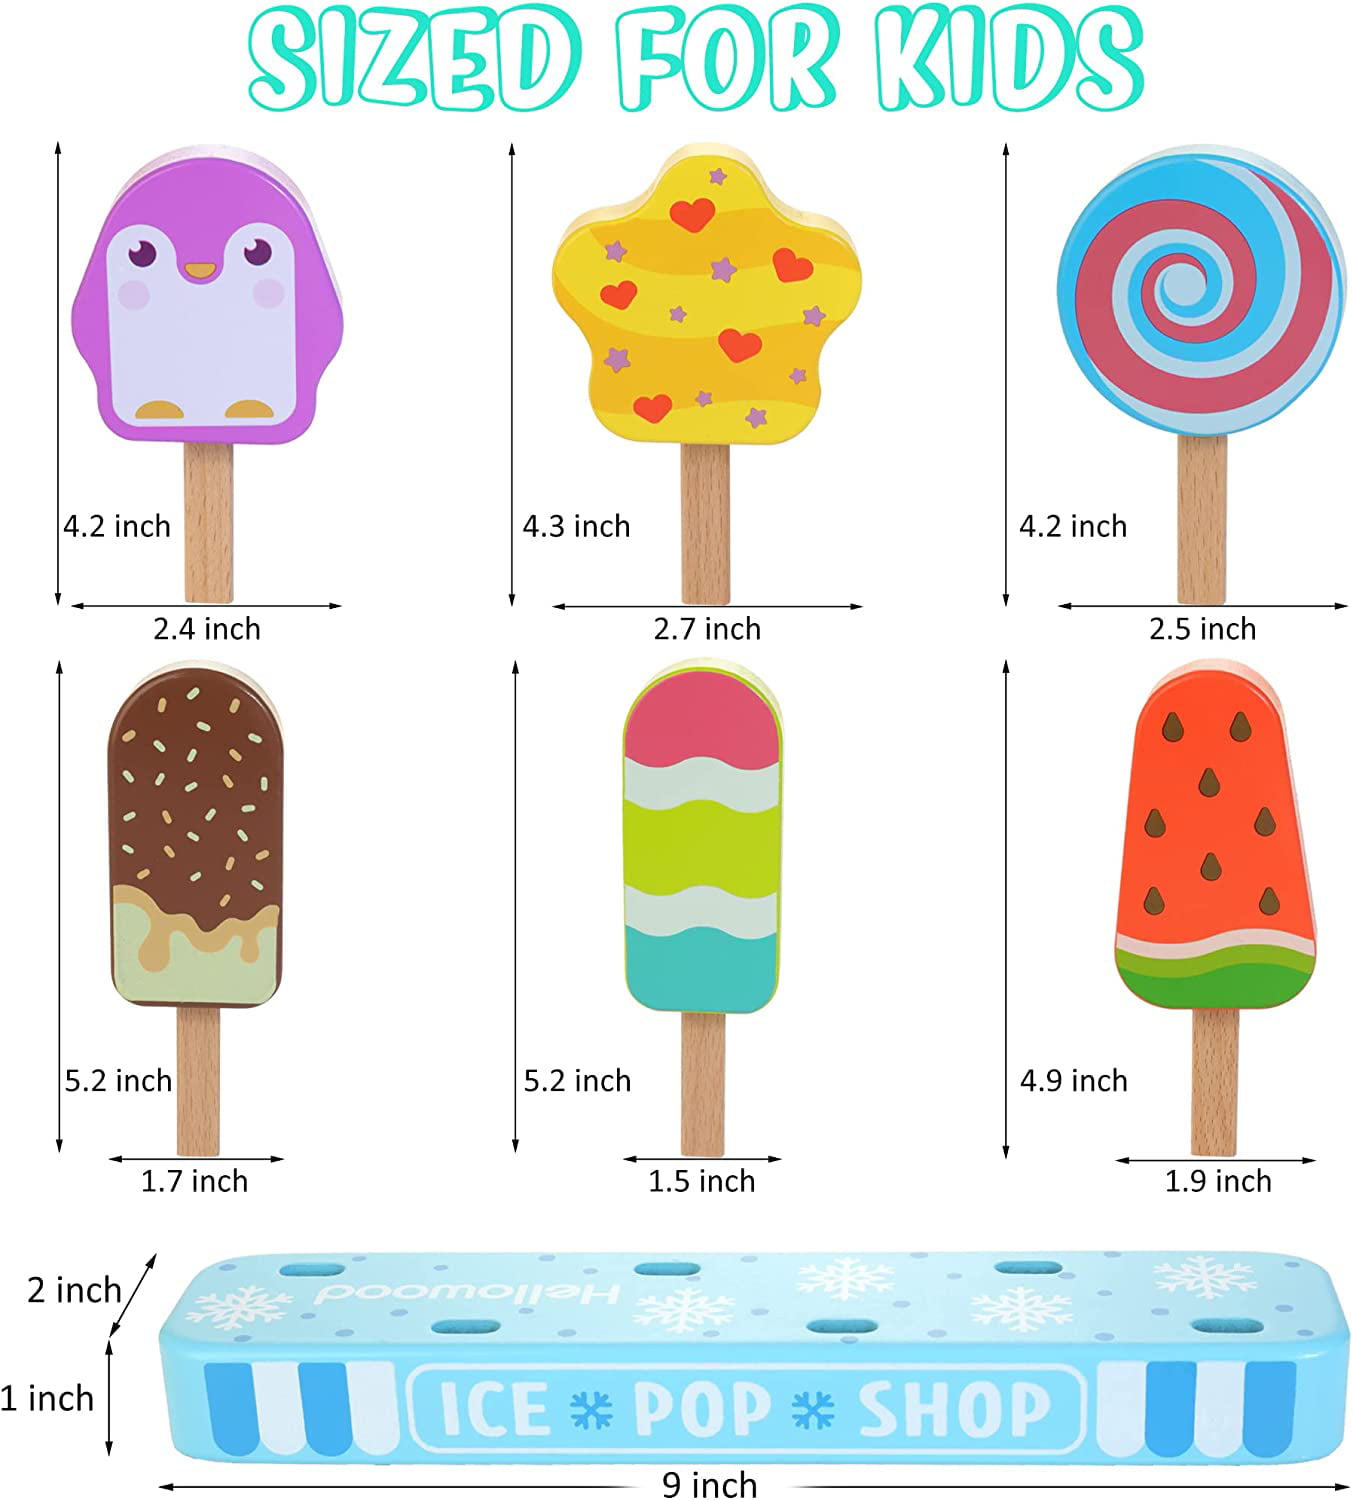 Wooden Ice Pop Shop Pretend Play Set for Kids, 7 Pieces Realistic Ice Lolly  Play Food Toys Set, Montessori Role Play Toys for Toddlers Age 2-4 